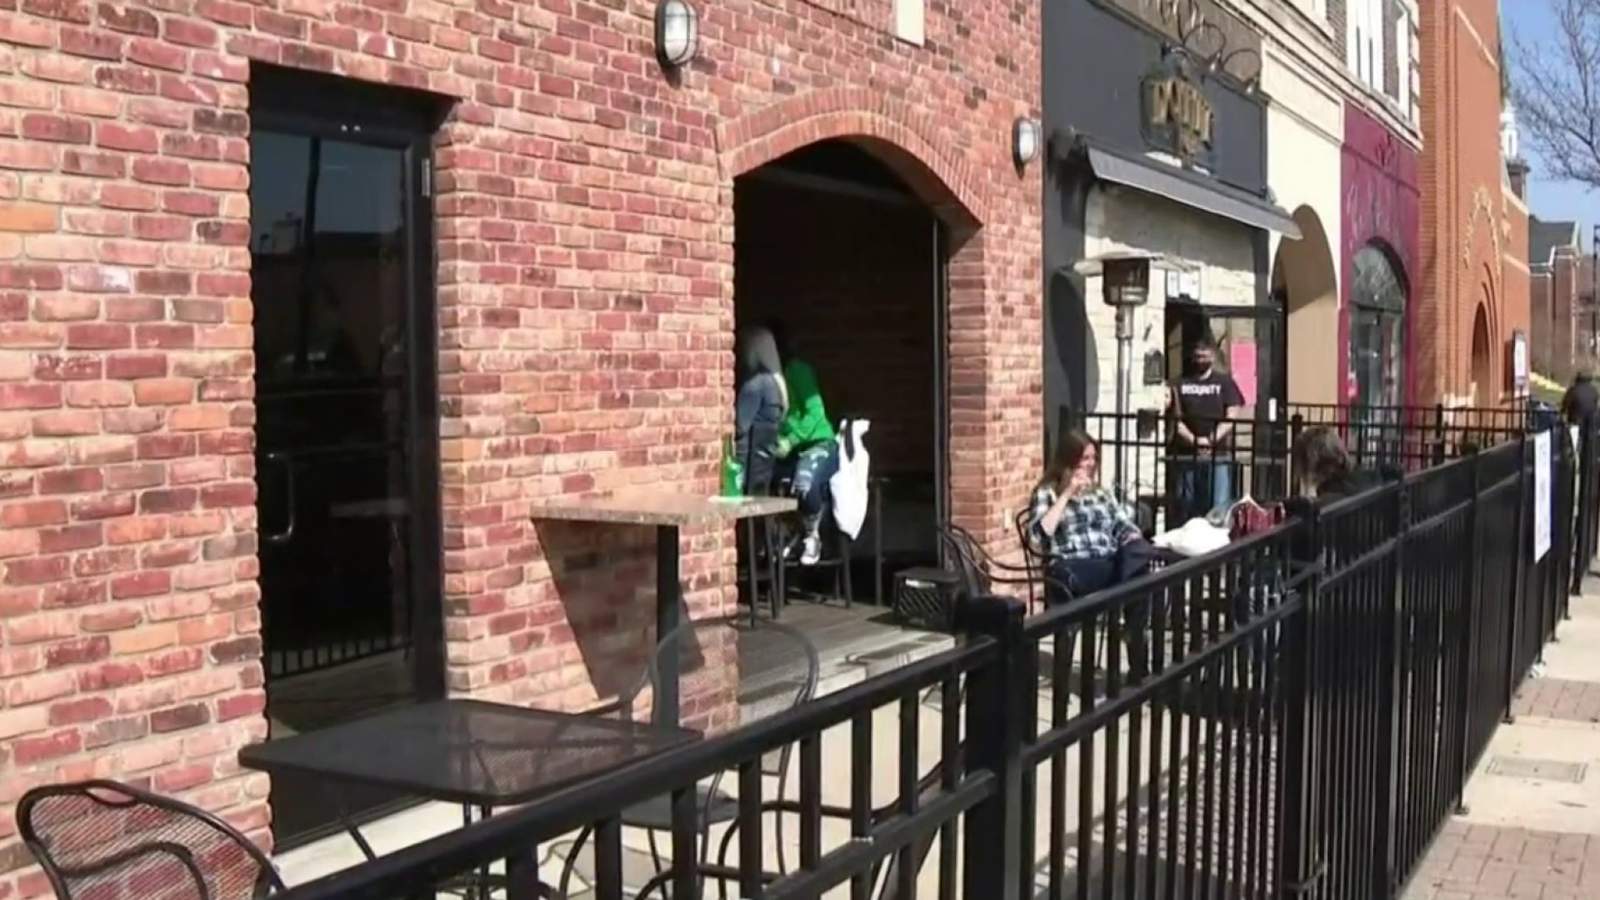 Wyandotte welcomes St. Patrick’s Day visitors to open container ‘social district’